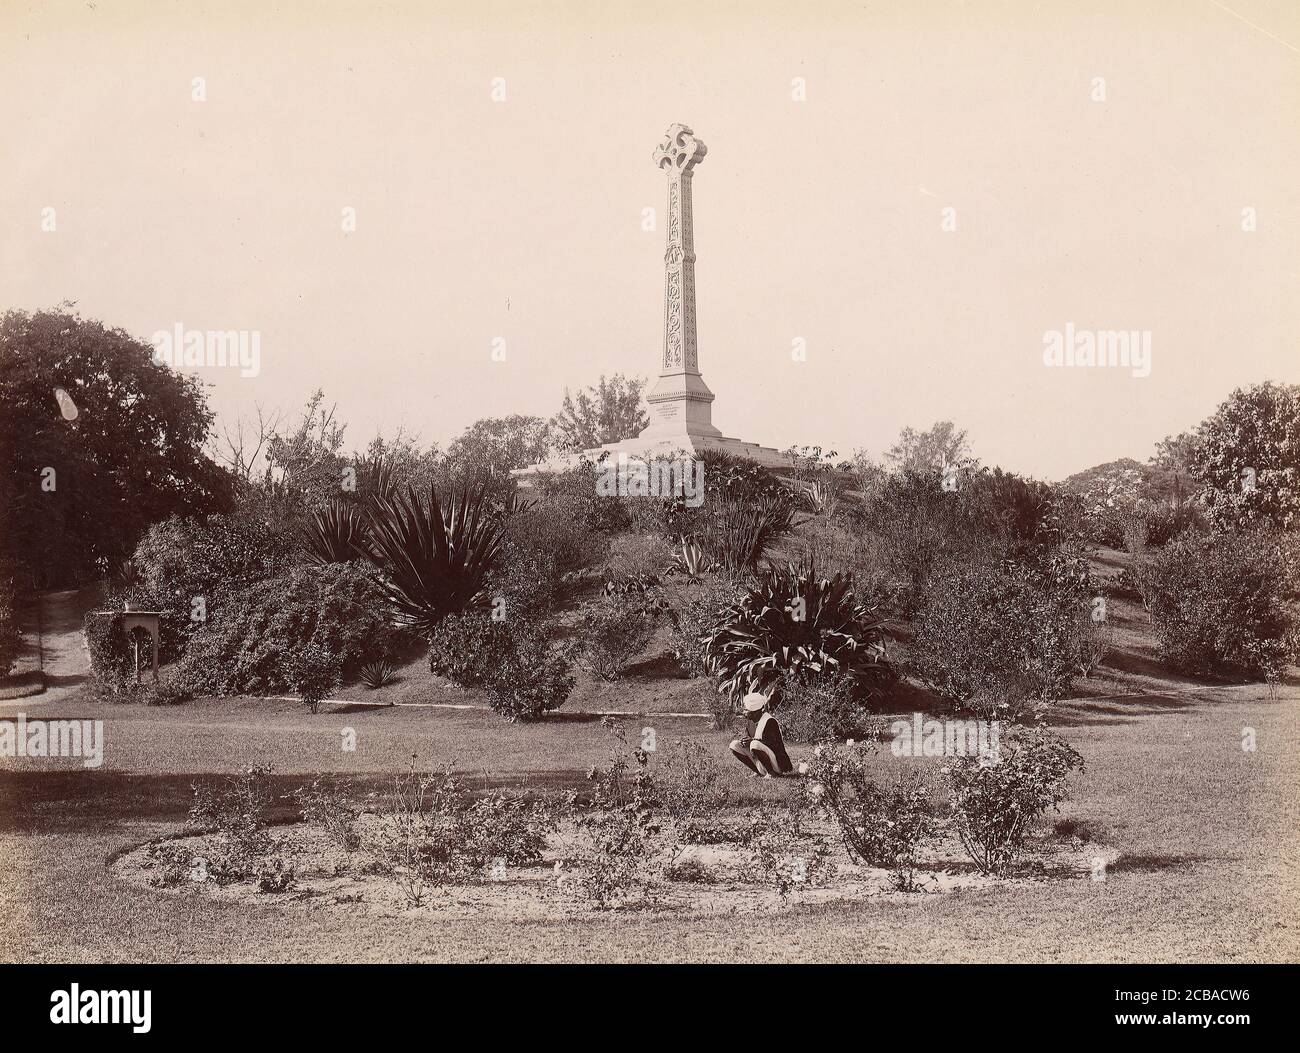 Colonel Lawrence Monument, Lucknow, India, 1860s-70s. Stock Photo